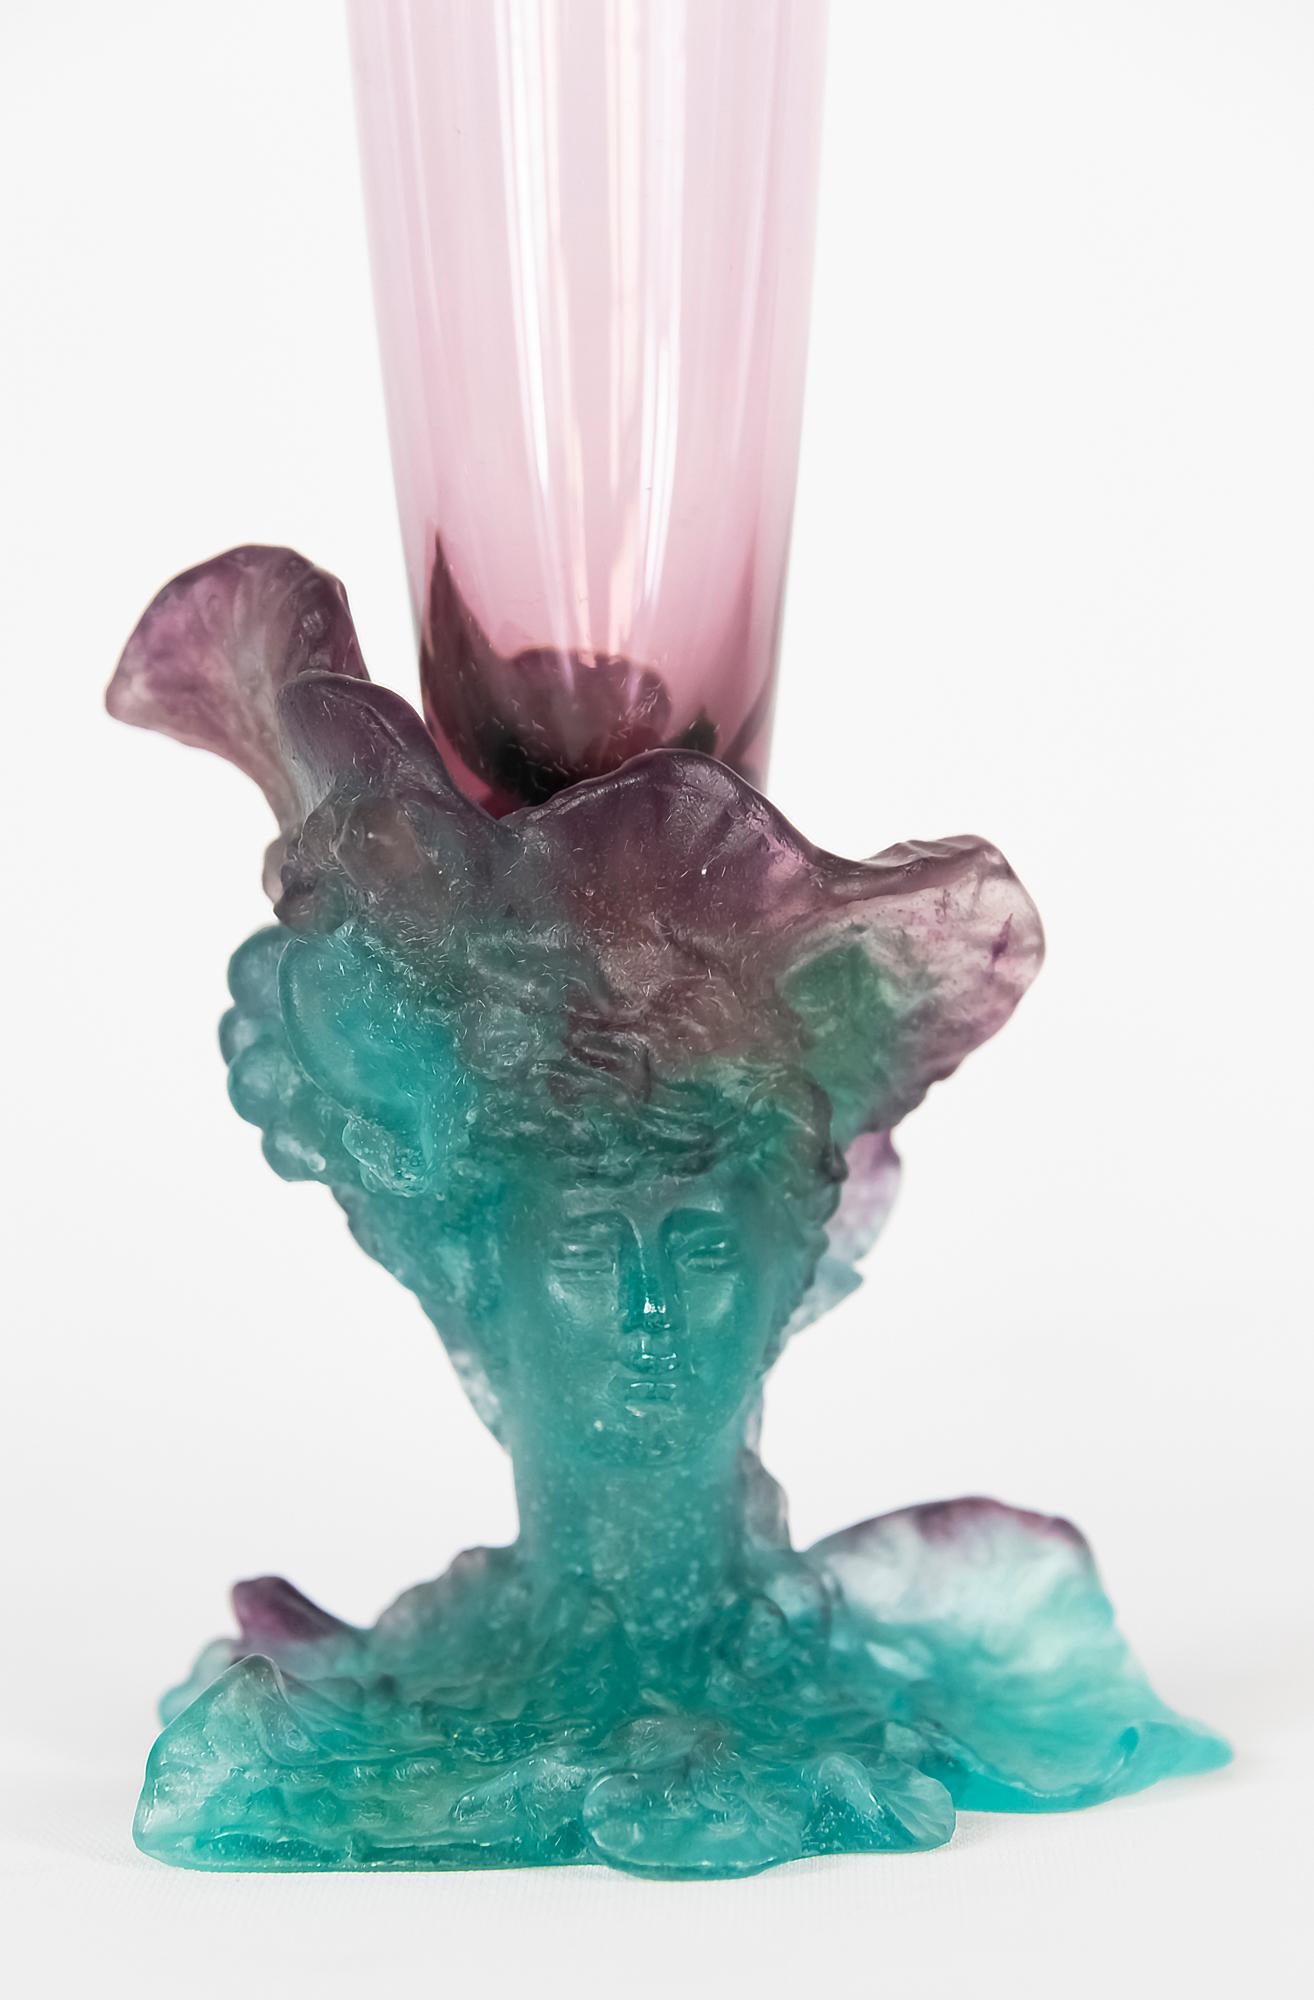 Tall French Daum Bacchus vase with amethyst glass top and green pâte de verre bottom, decorated with a woman face, grapes and leaves. Circa 2000.
Signed 